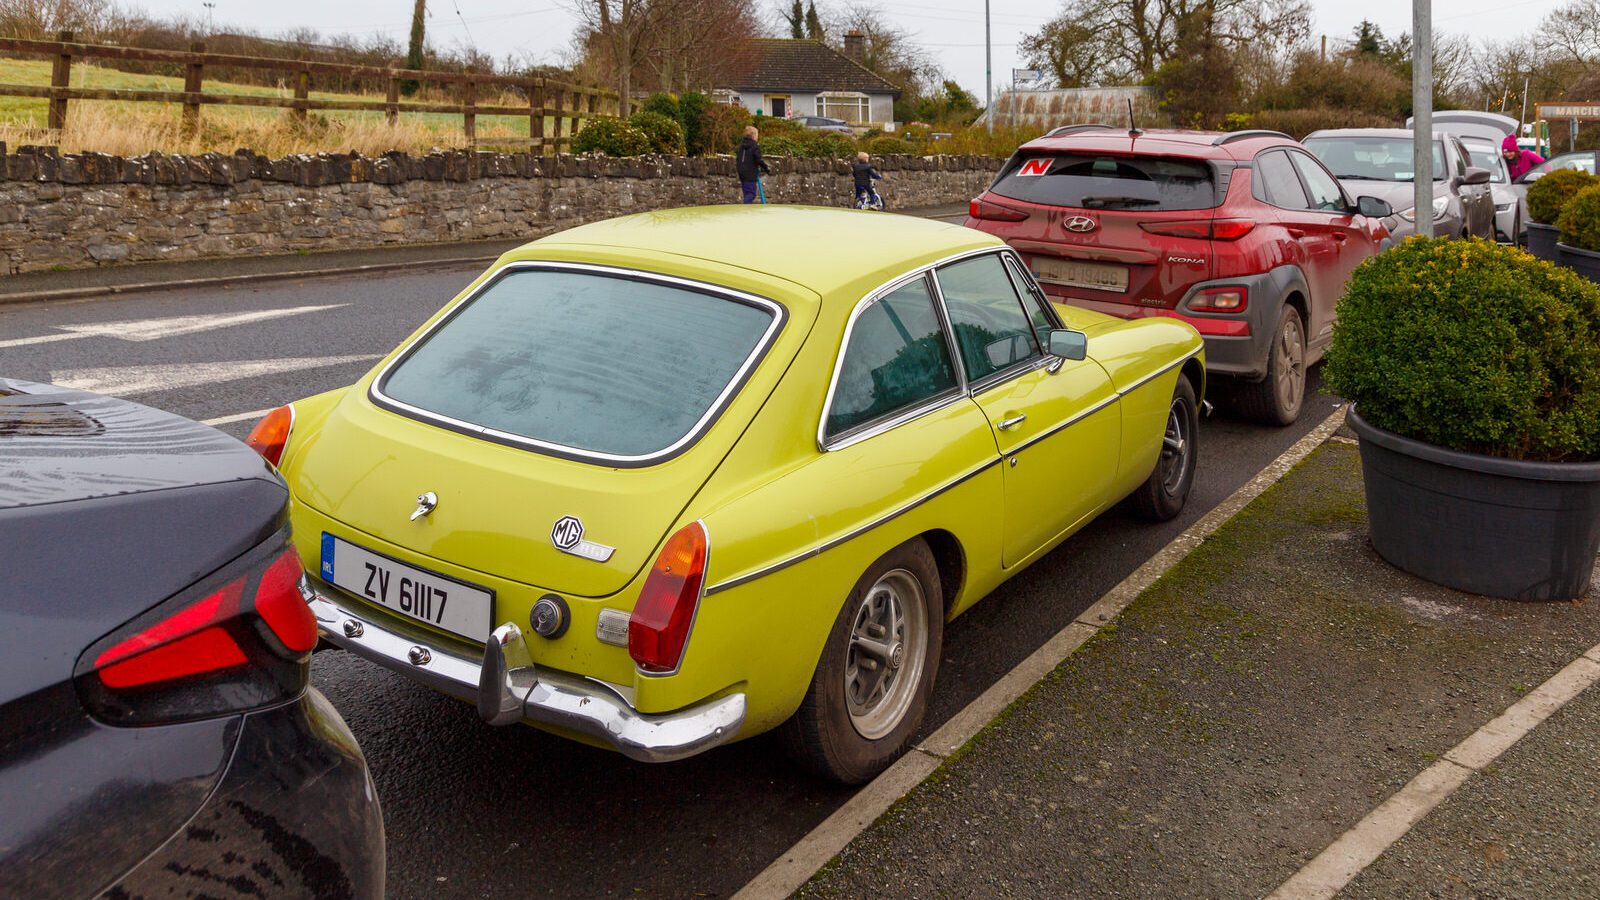 THIS WAS NOT WHAT I GOT FOR CHRISTMAS [YELLOW MG SPORTS CAR]-226761-1